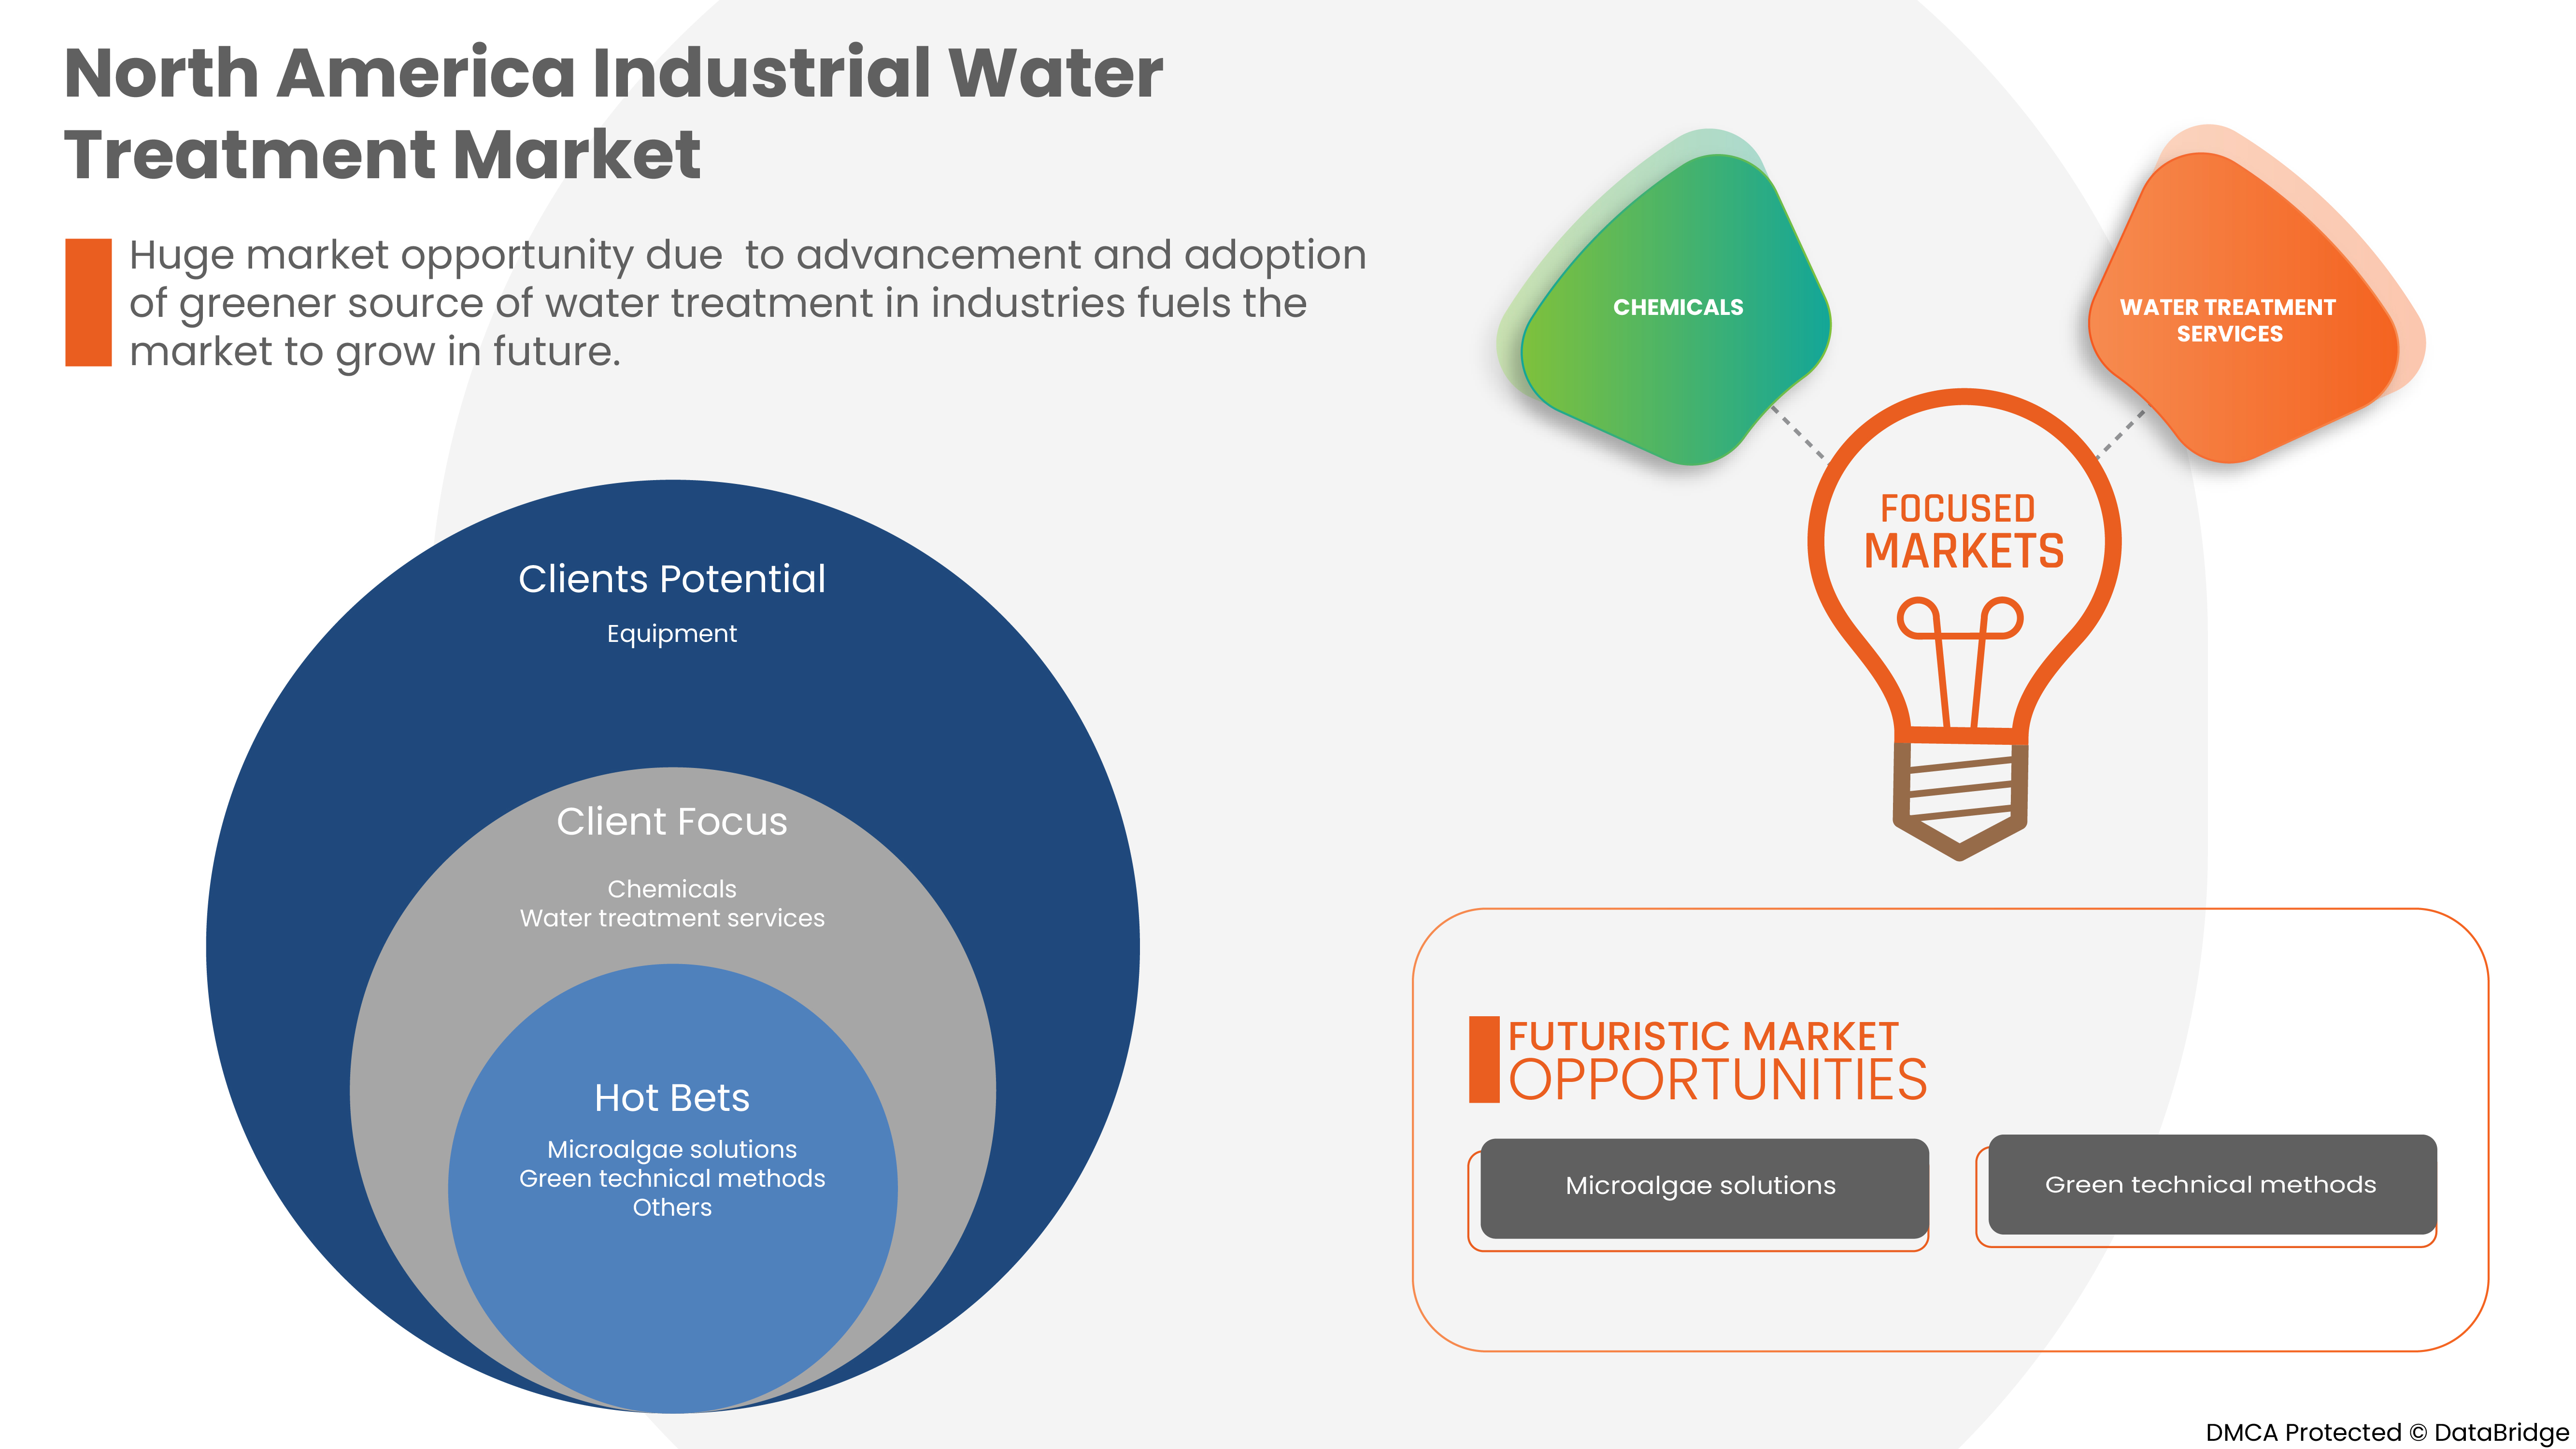 North America Industrial Water Treatment Market